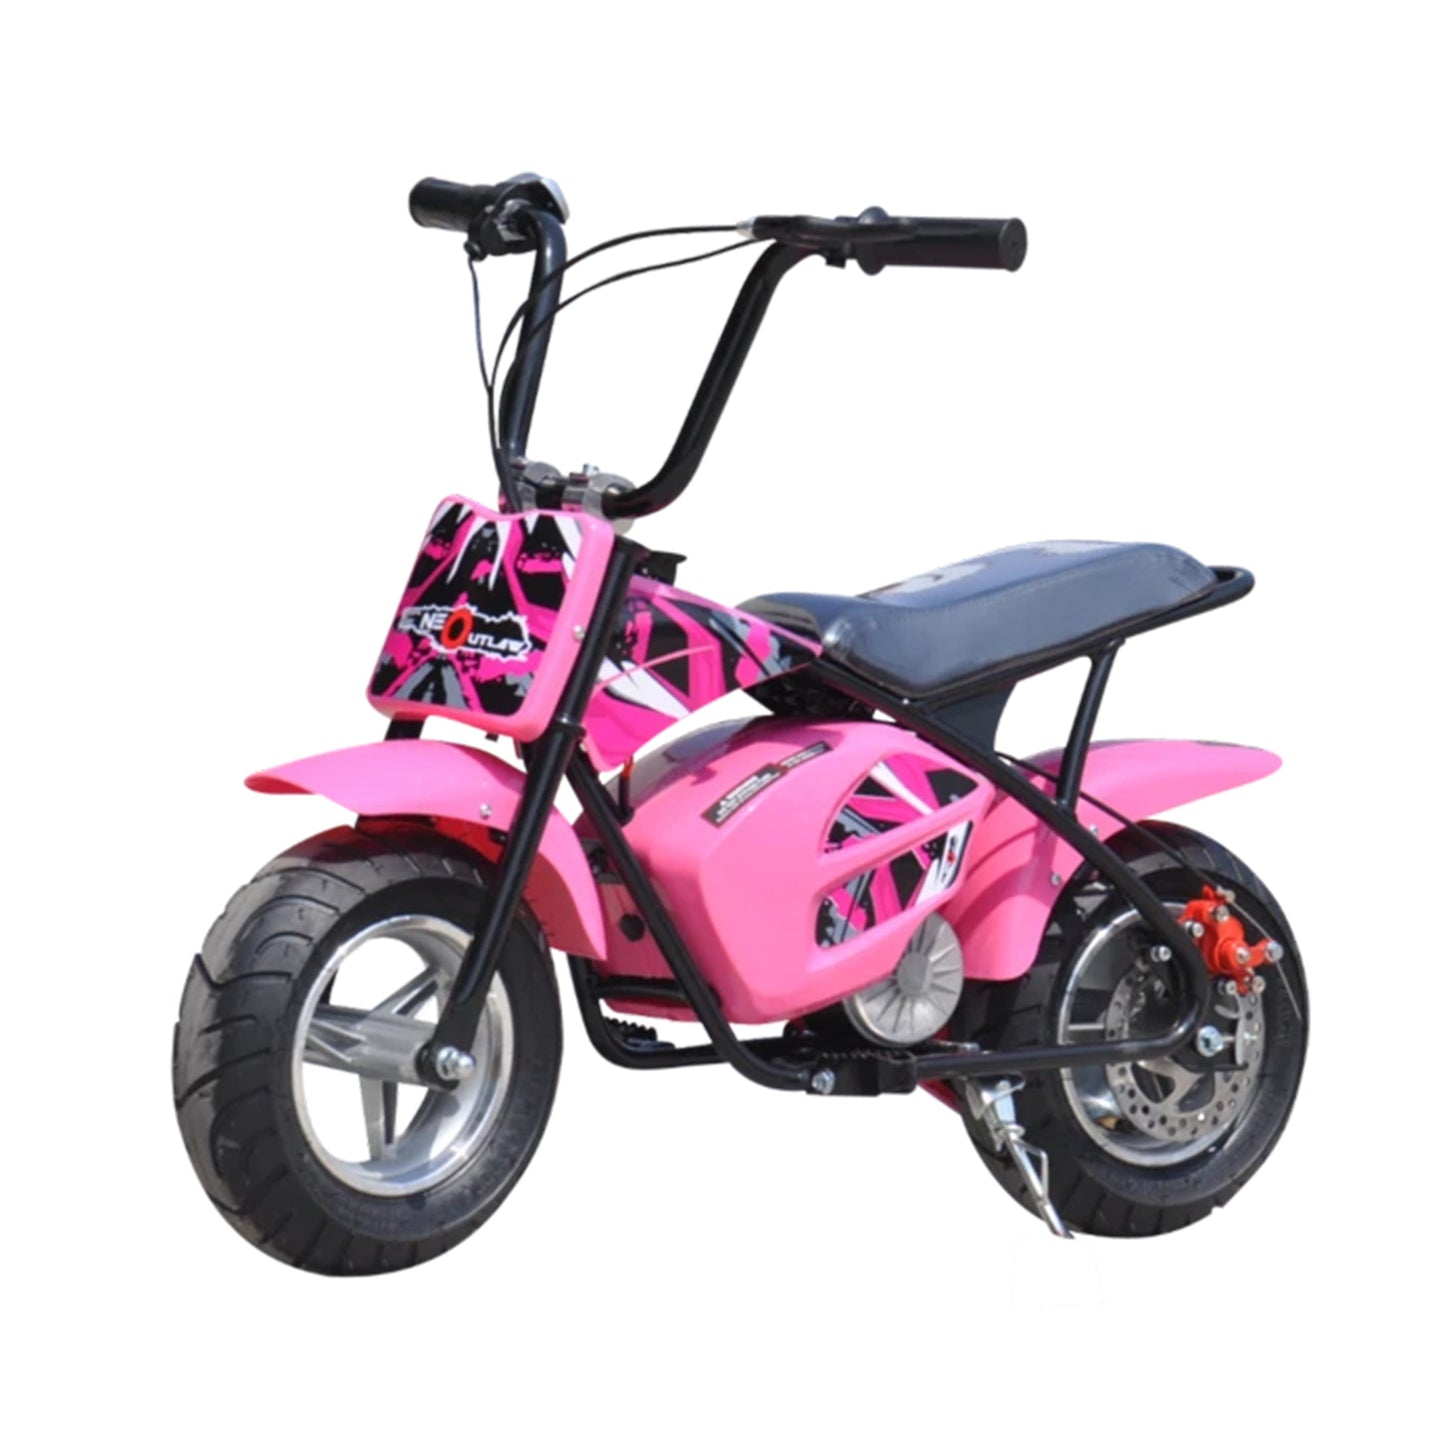 "Pink Mini Dirtbike Scrambler for Kids, 250 Watt 12 Volt Electric Ride-on by Kids Dirt Bike with Stabilizers and Twist n Go Throttle on White Background"